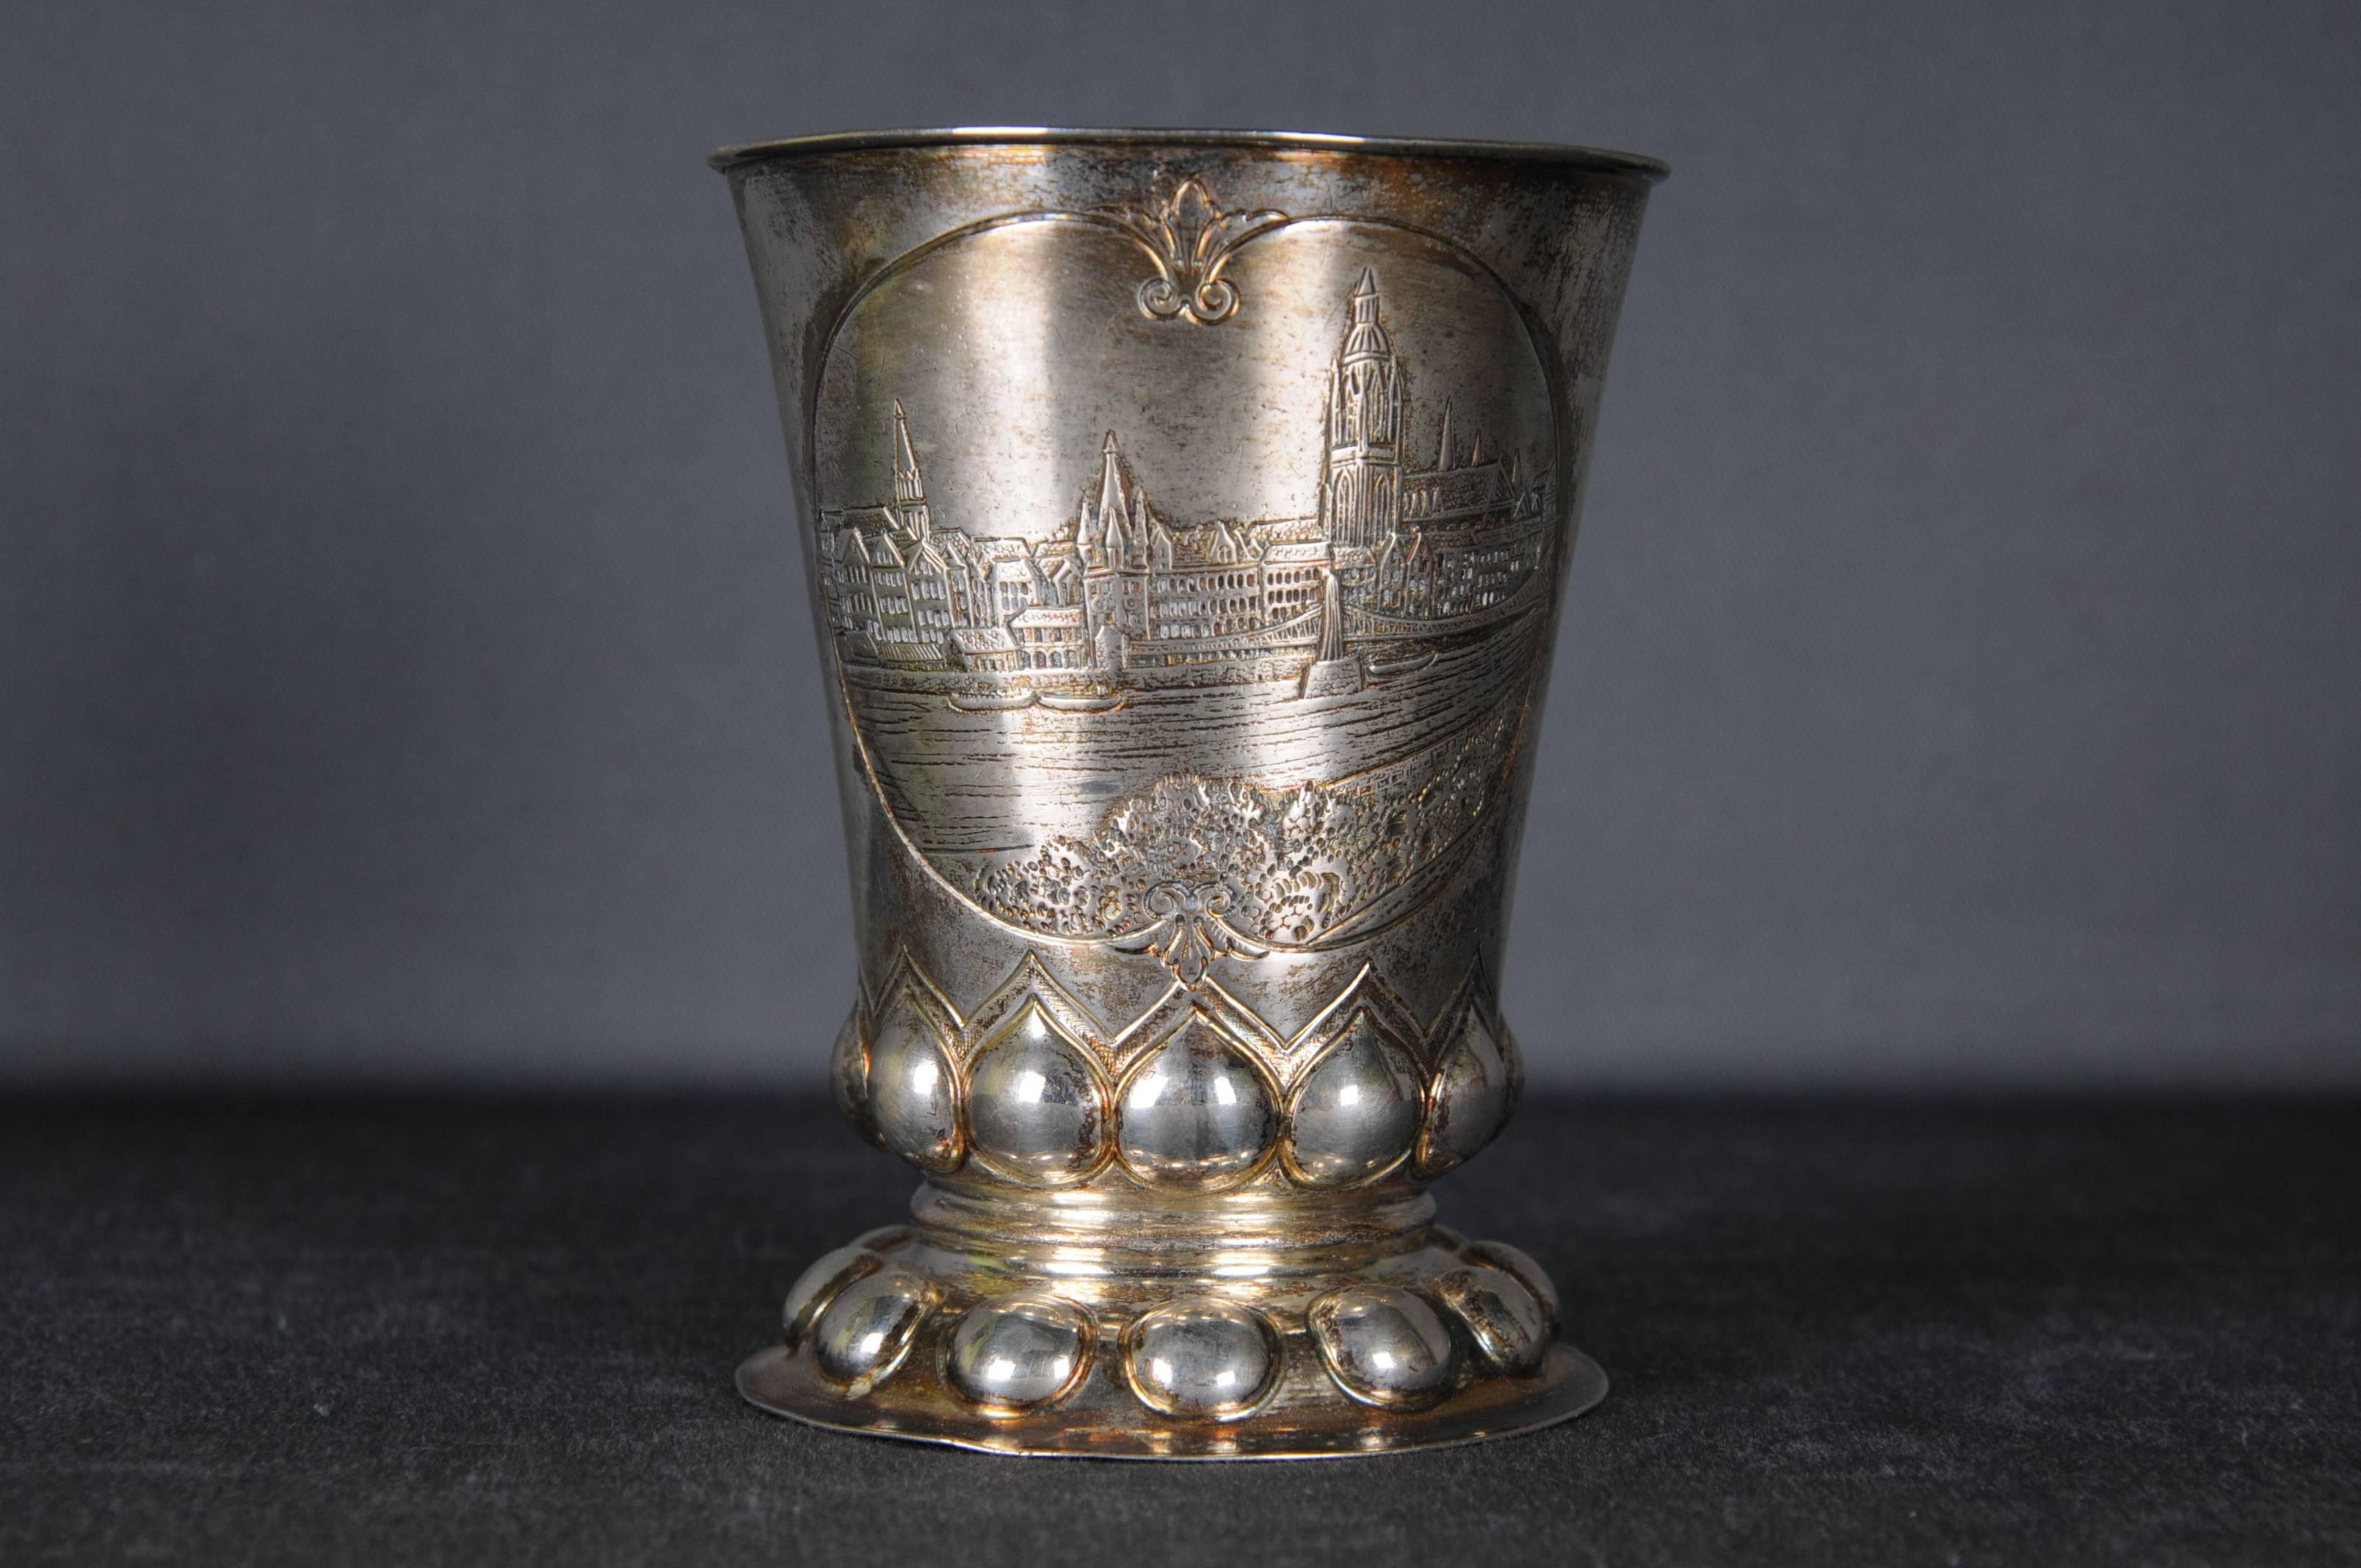 Antique Silver Footcup 800er Silver Germany Cup, gilded, German City View  For Sale 1